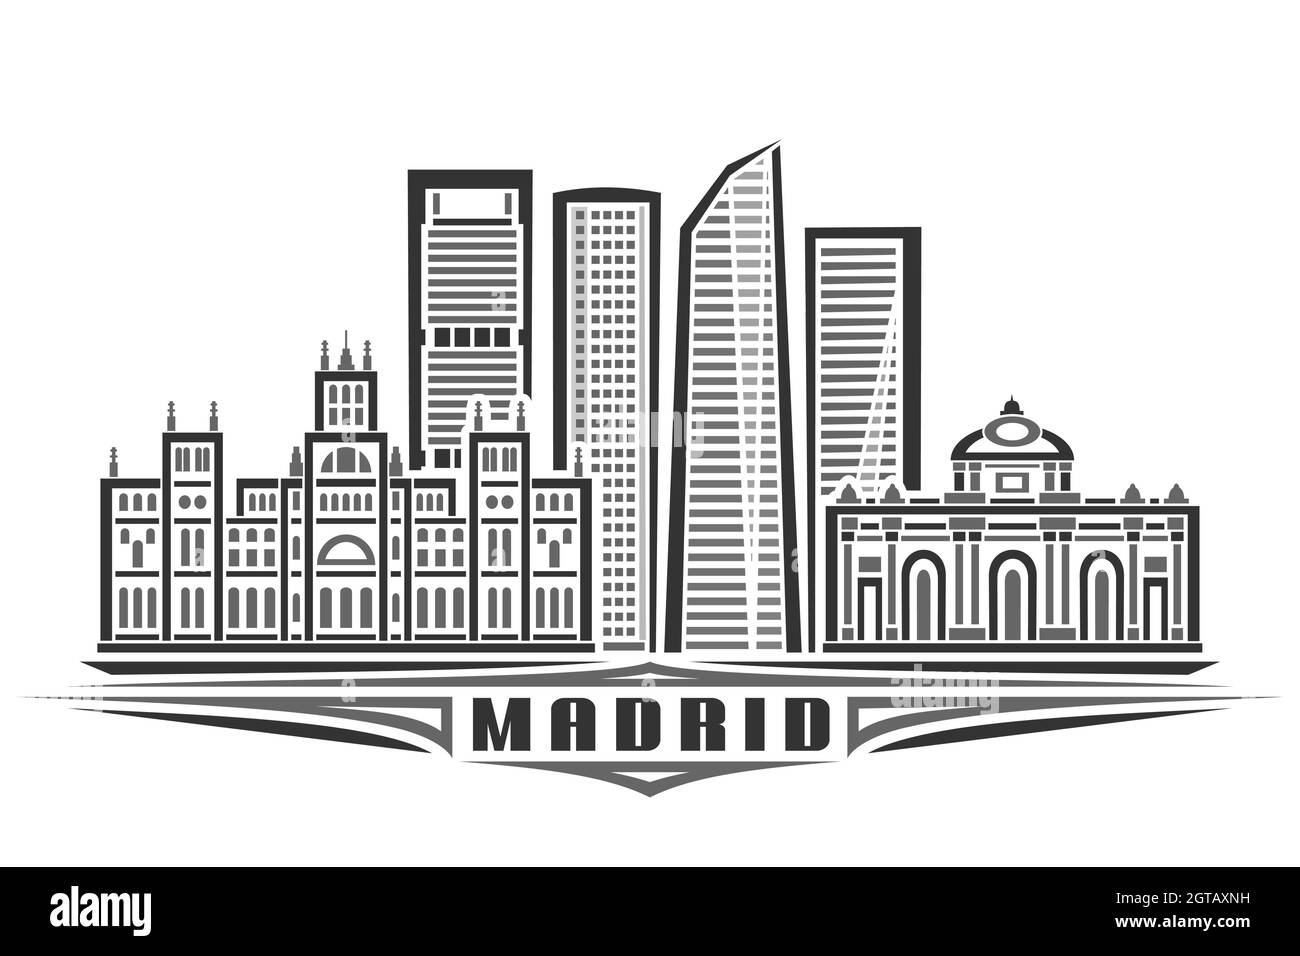 Vector illustration of Madrid, monochrome horizontal poster with linear design famous madrid city scape, urban line art concept with unique decorative Stock Vector